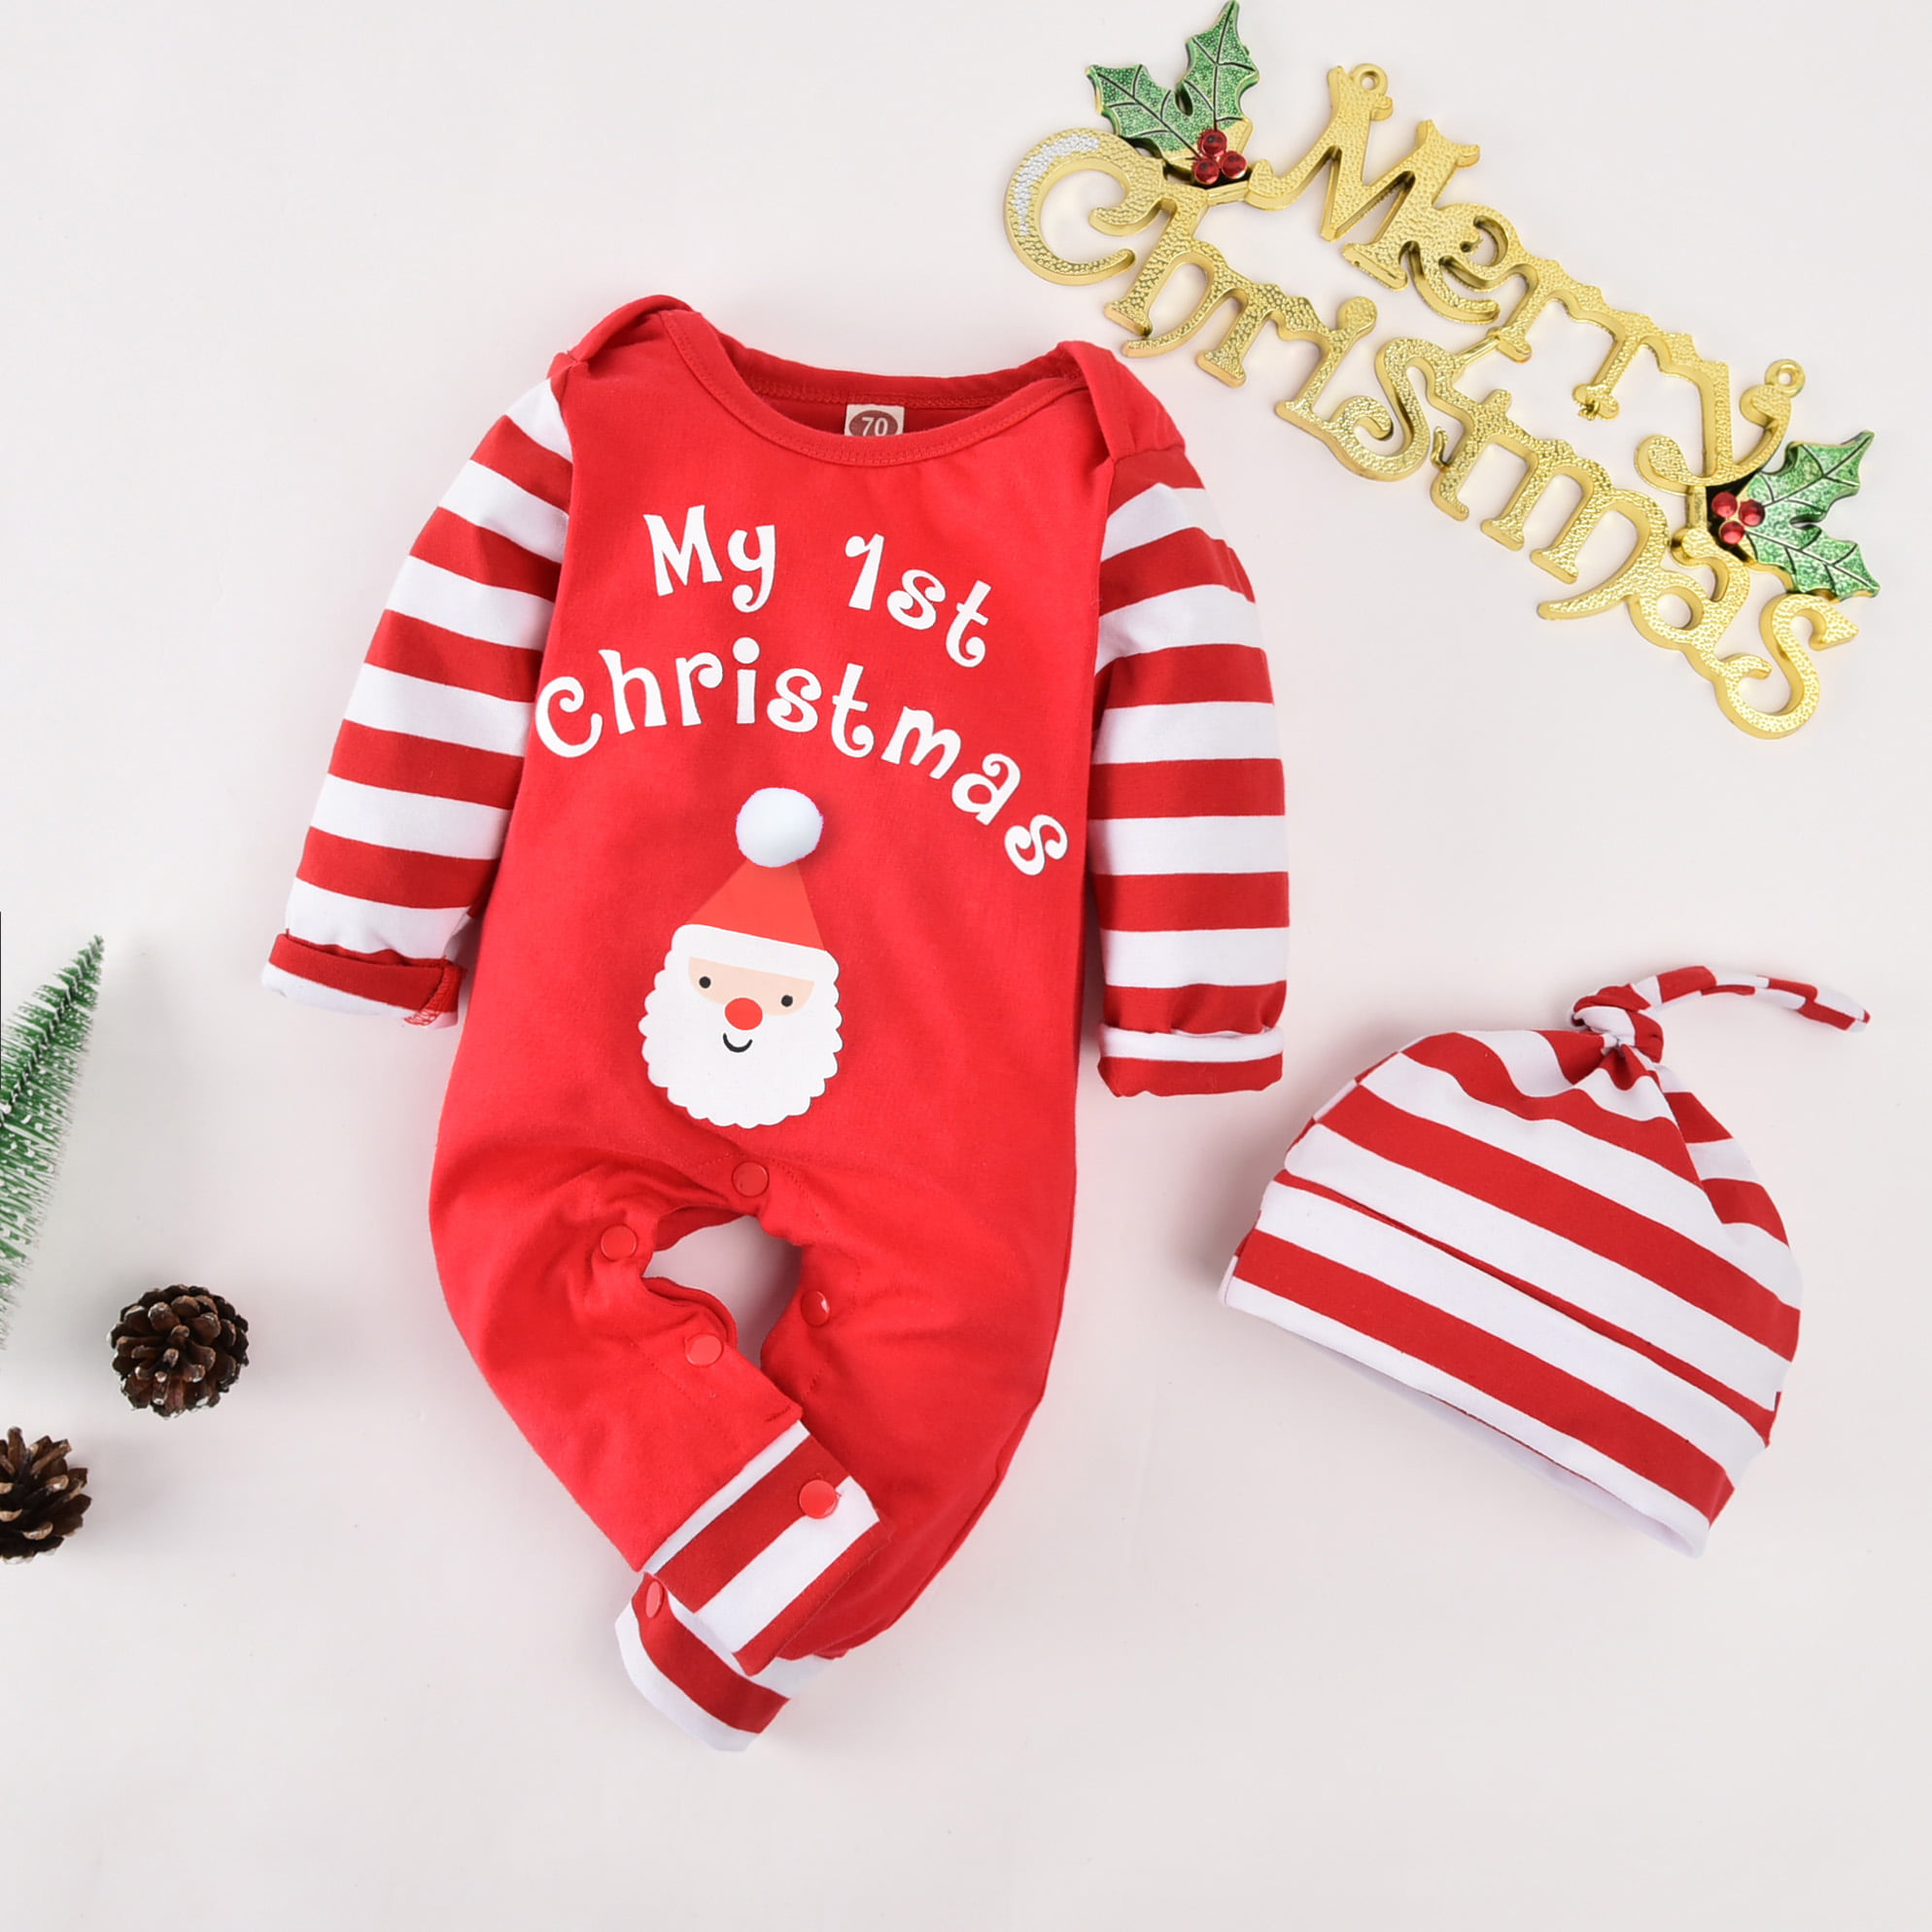 Aalizzwell Infant Baby Boys Girls My First Christmas Outfit Xmas Romper Elf Onesie Santa Clothes 